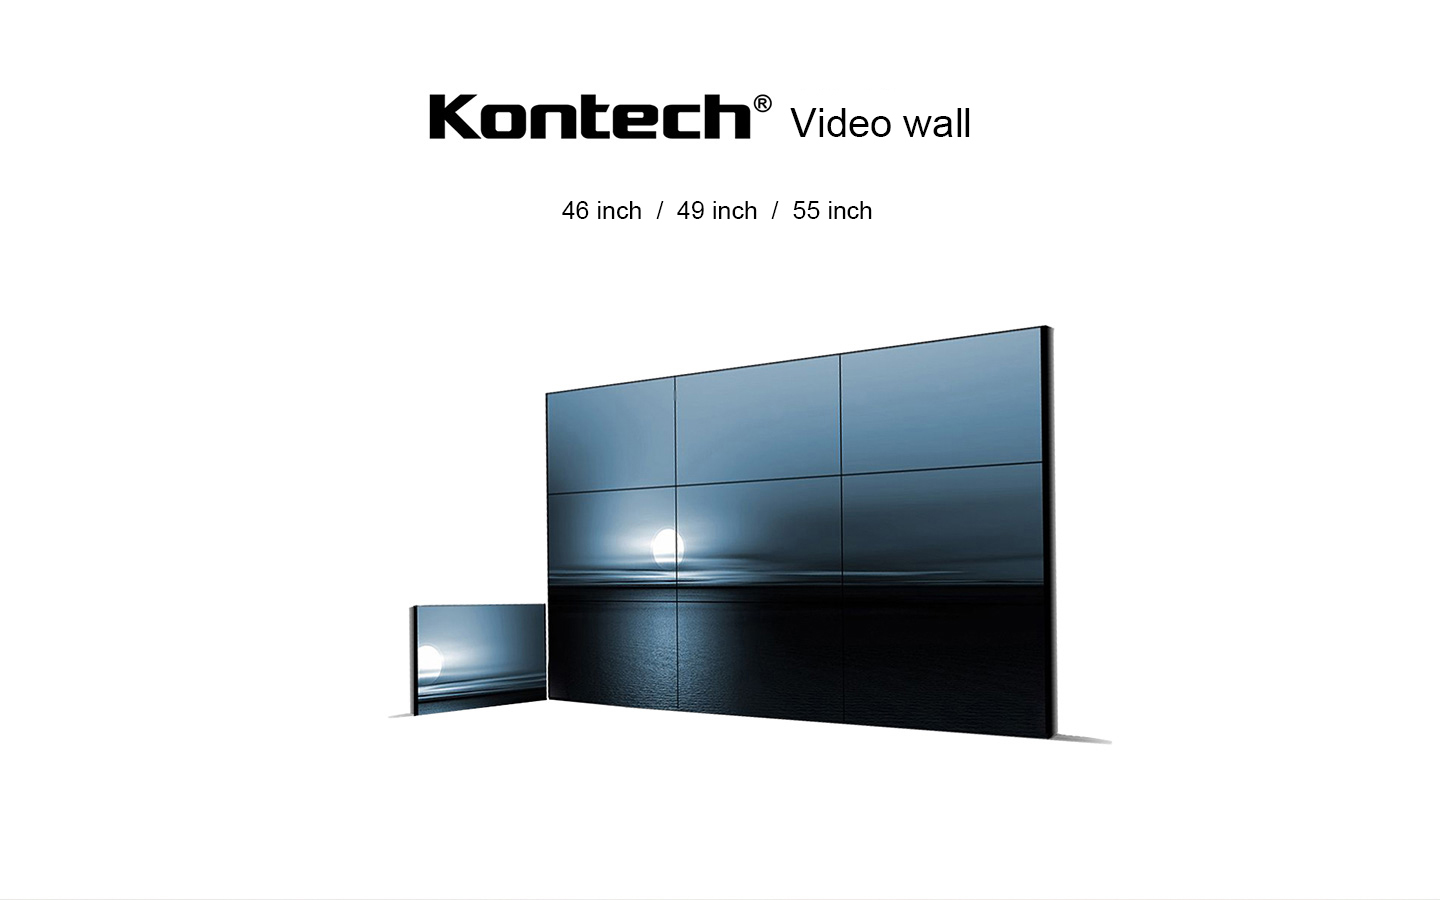 Kontech video wall  large screen display system is specially designed for users based on their usage scale requirements. It covers the most excellent high-definition video wall narrow edge splicing processing technology, high-definition digital display technology, signal switching technology, multi-screen image processing technology, remote video signal control technology, multi-channel signal processing and other performance parameter matching technologies in the world, making it an advanced large screen display system with high intelligence, high stability, high definition, and simple operation.